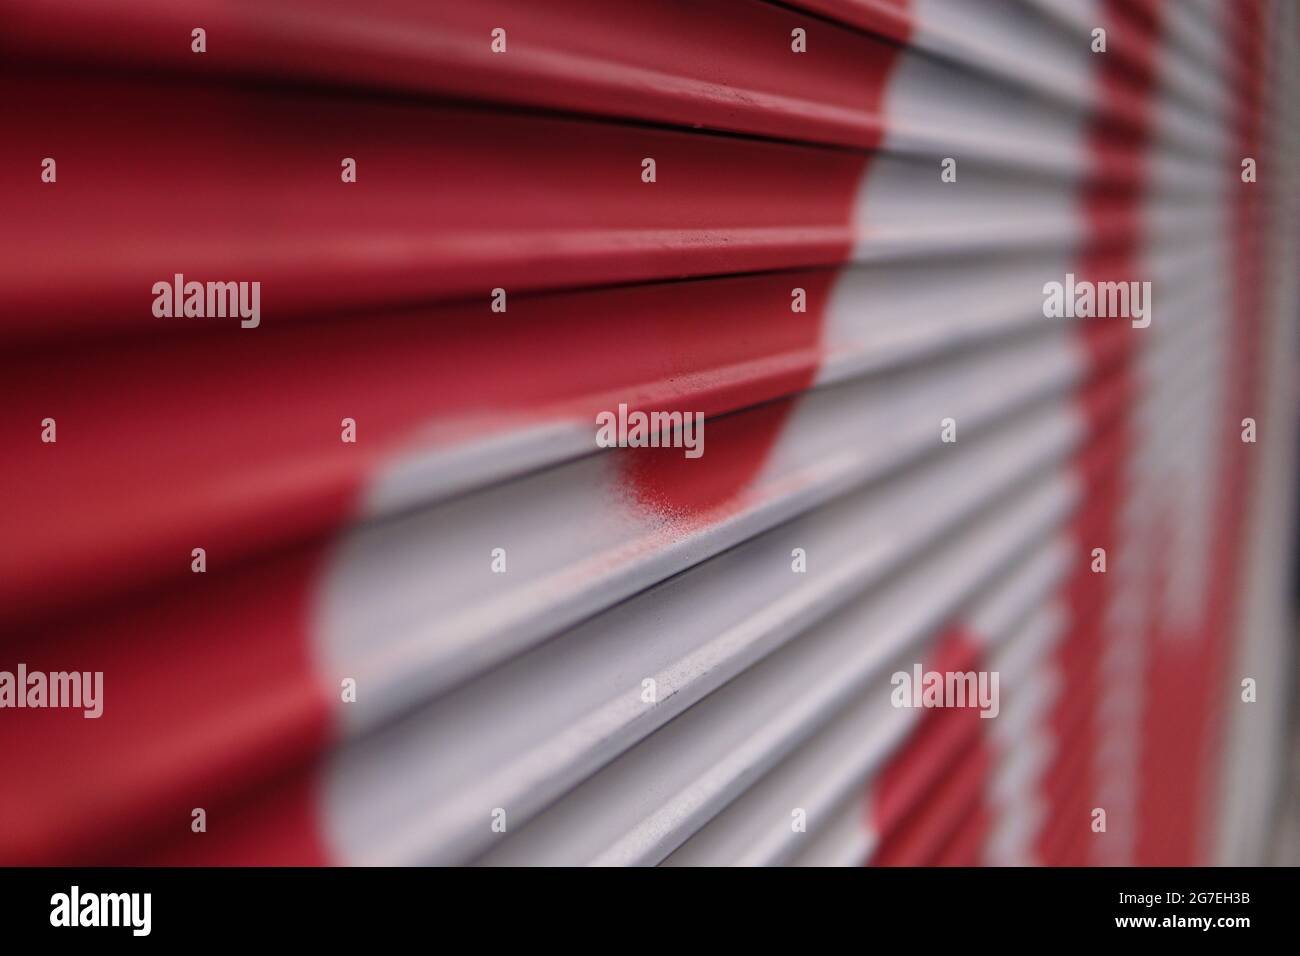 Closeup shot of an abstract red and white graffiti on a folding metal gate outdoors Stock Photo